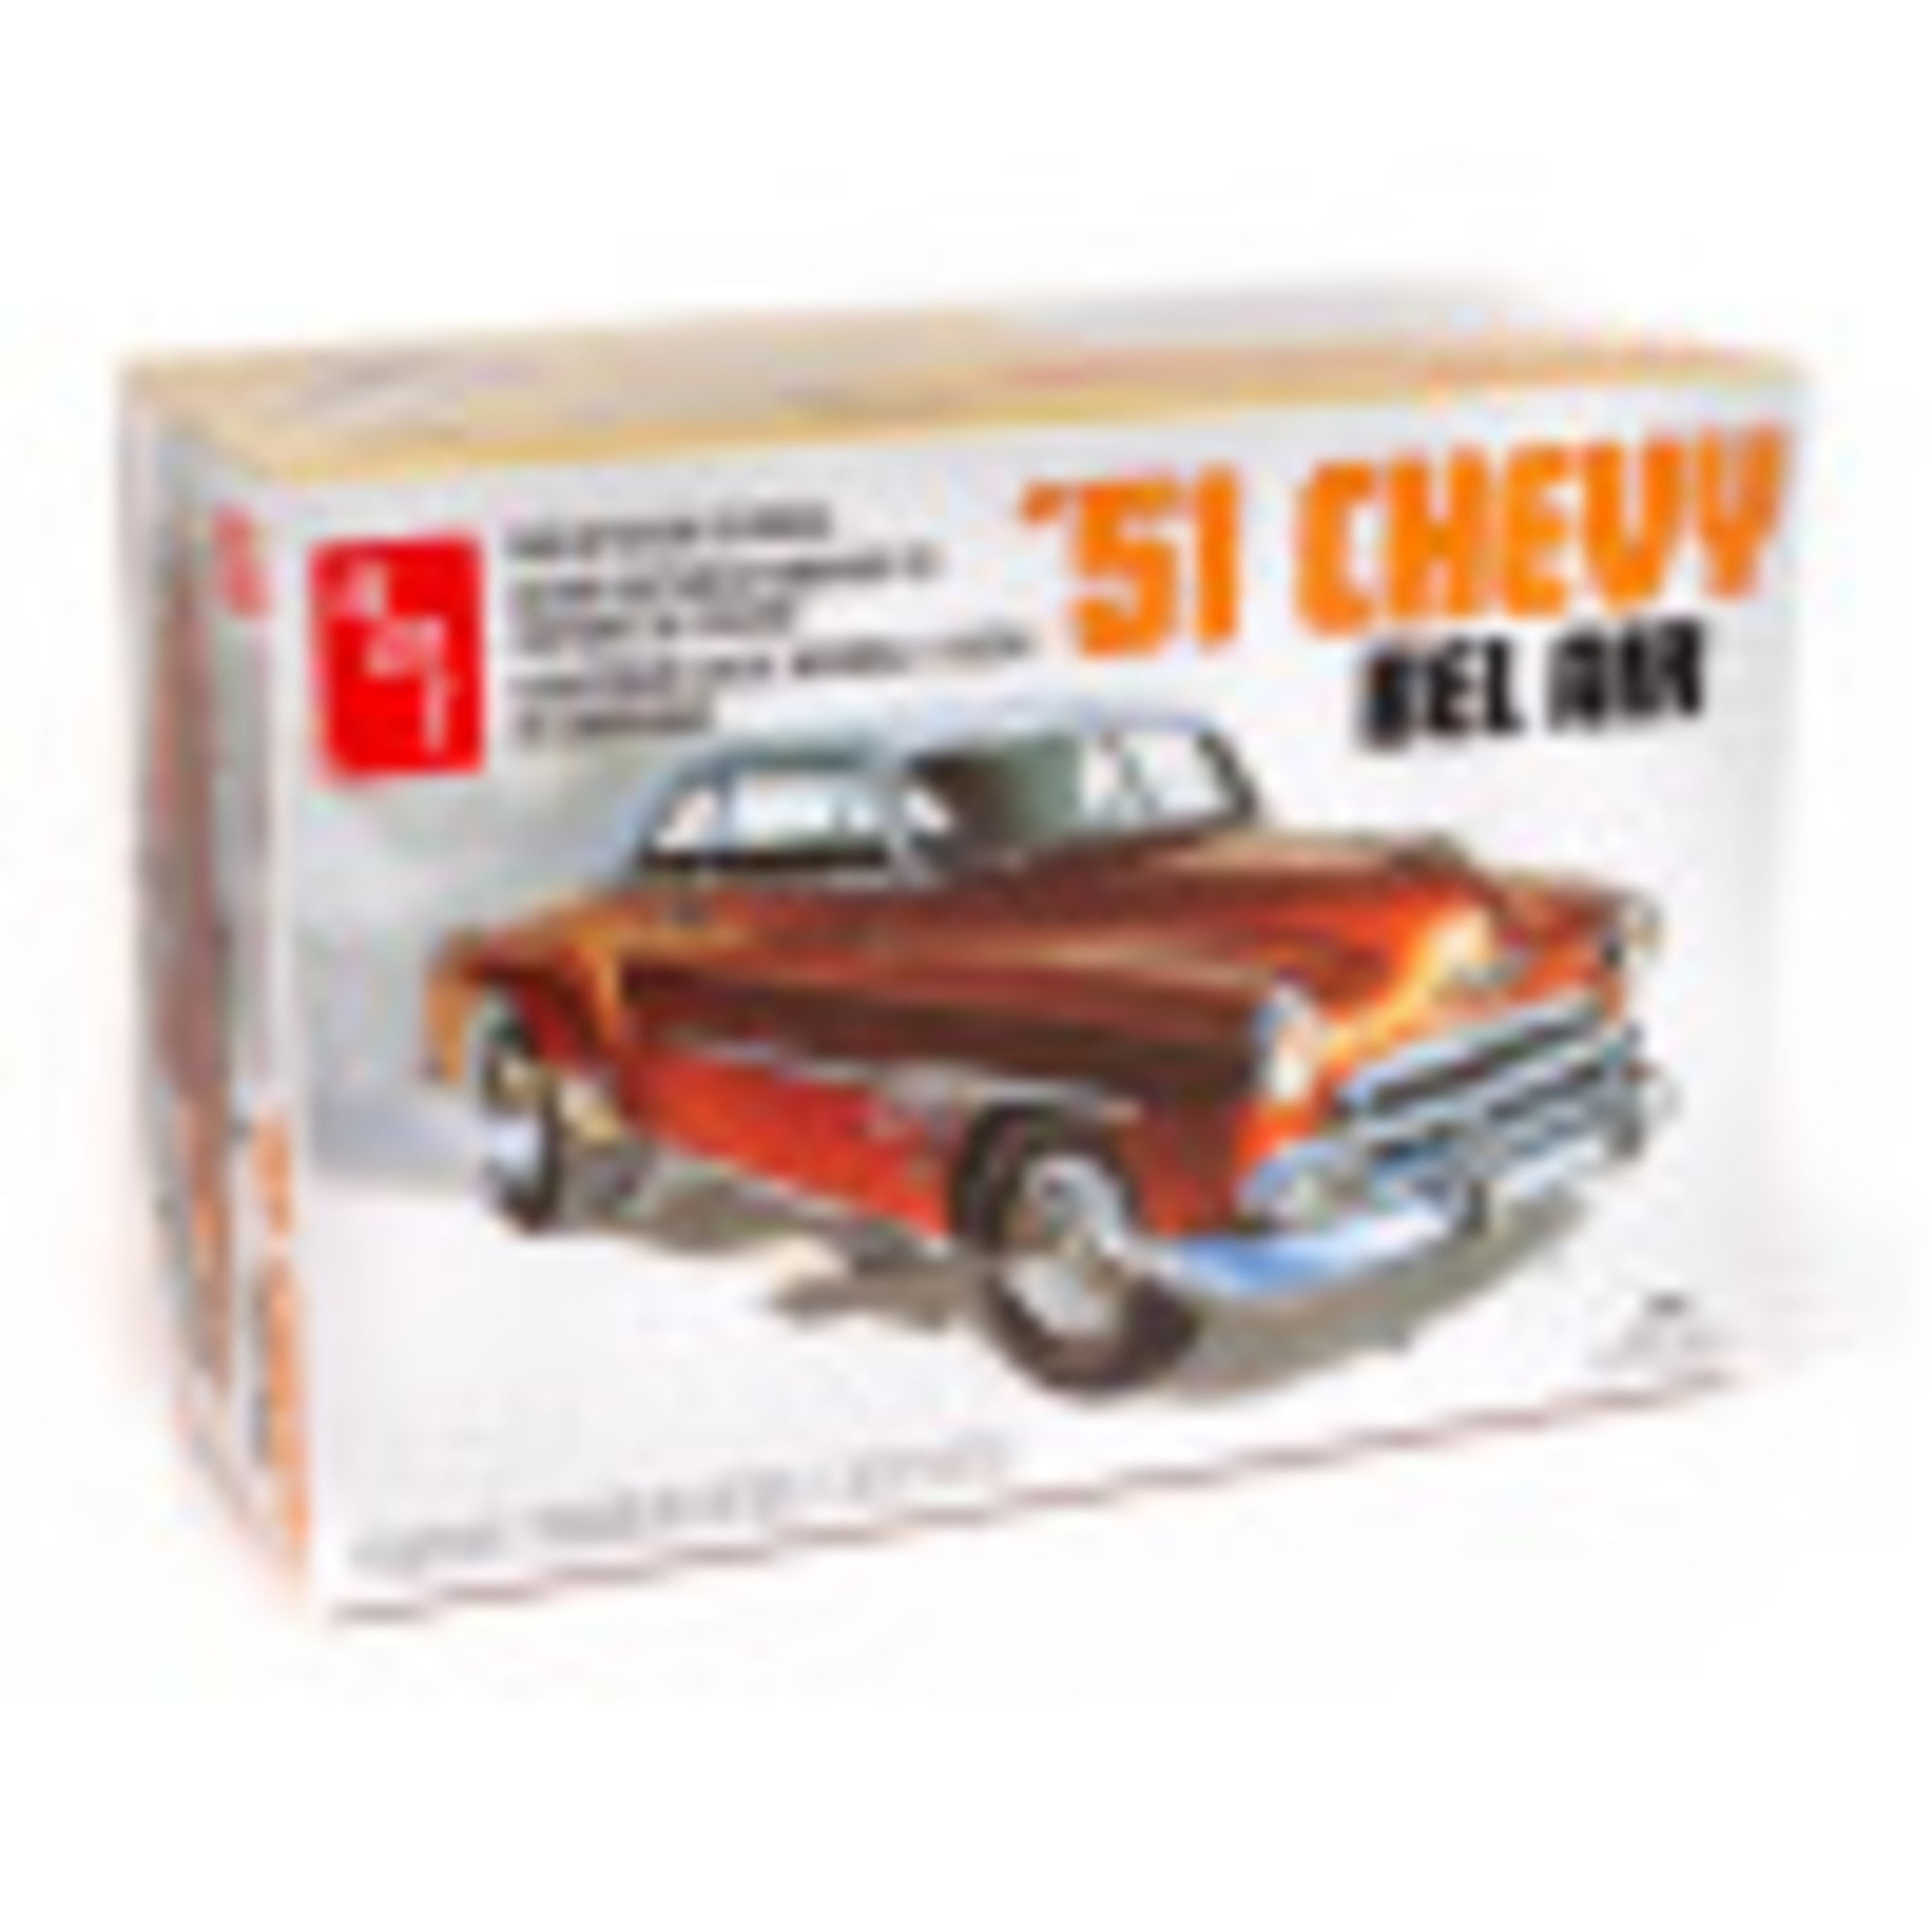 862 Skill 2 Model Kit 1951 Chevrolet Bel Air 2 In 1 Kit Retro Deluxe Edition 1 By 25 Scale Model